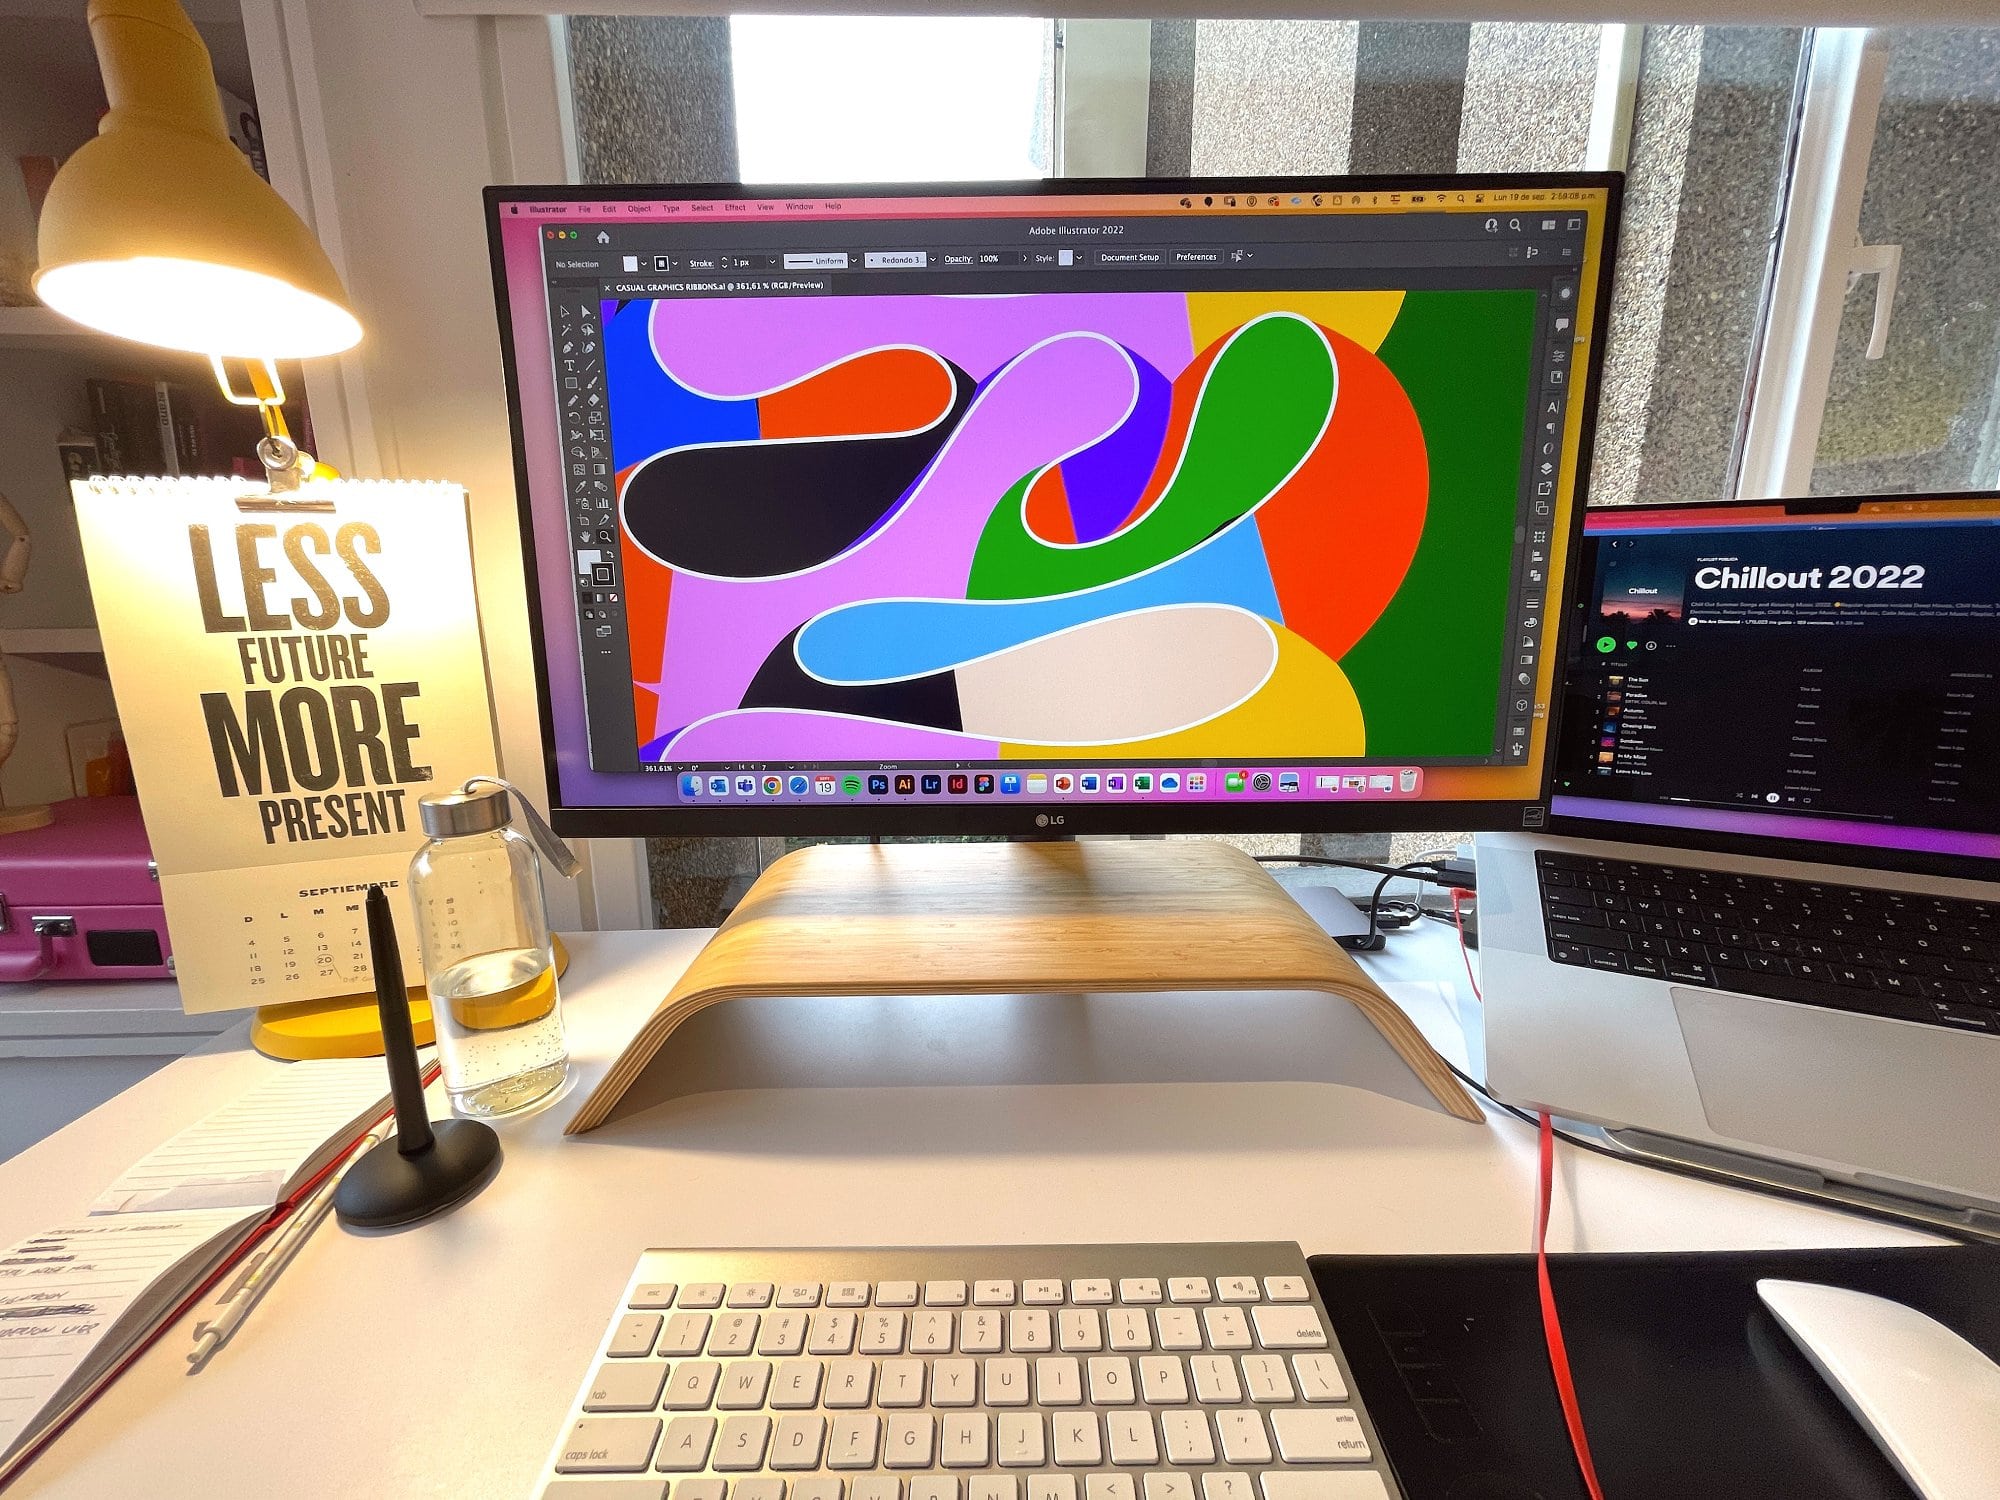 A vibrant desk setup with a yellow lamp and a “Less future, more present” calendar